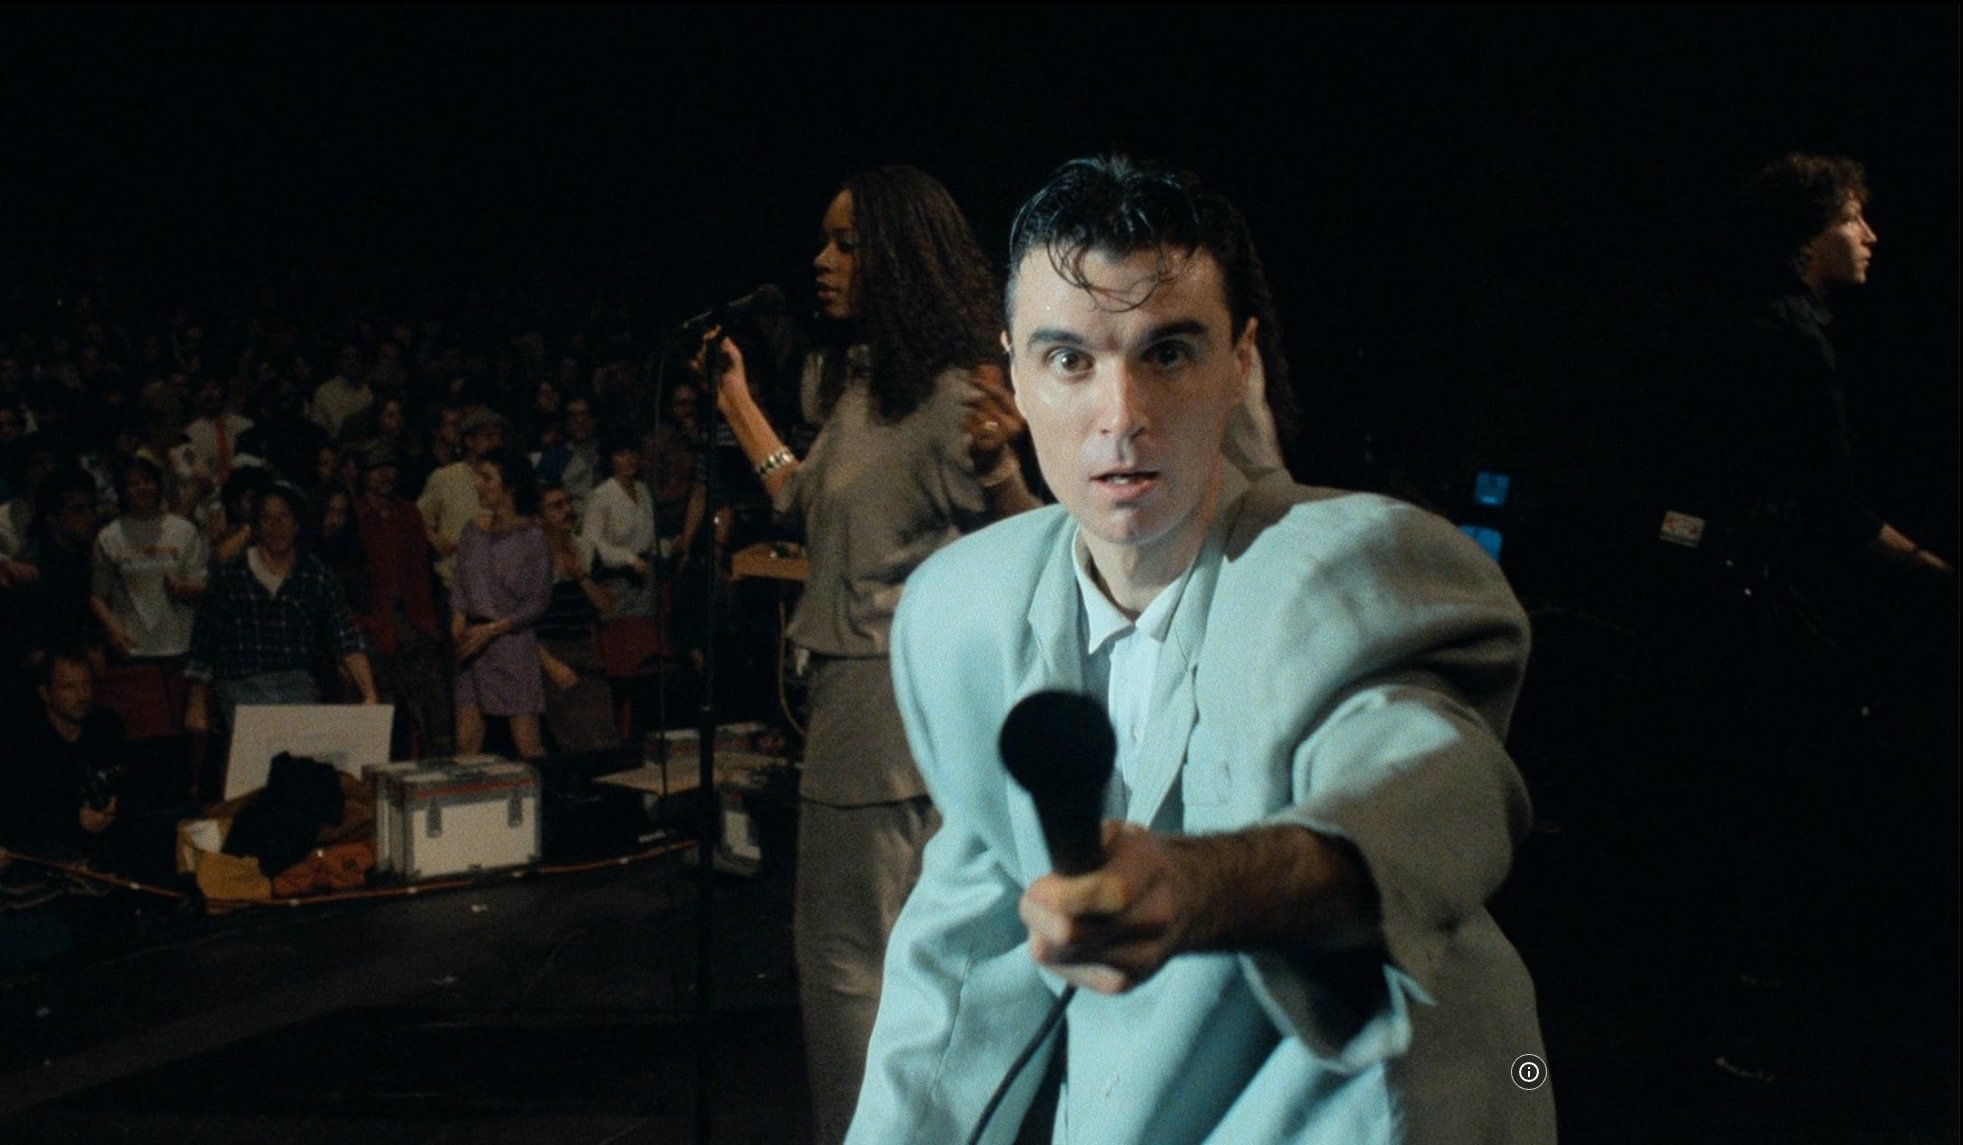 David Byrne of Talking Heads in Stop Making Sense (1984), which many see as one of the best concert movies ever made. Photo: Cinecom Pictures